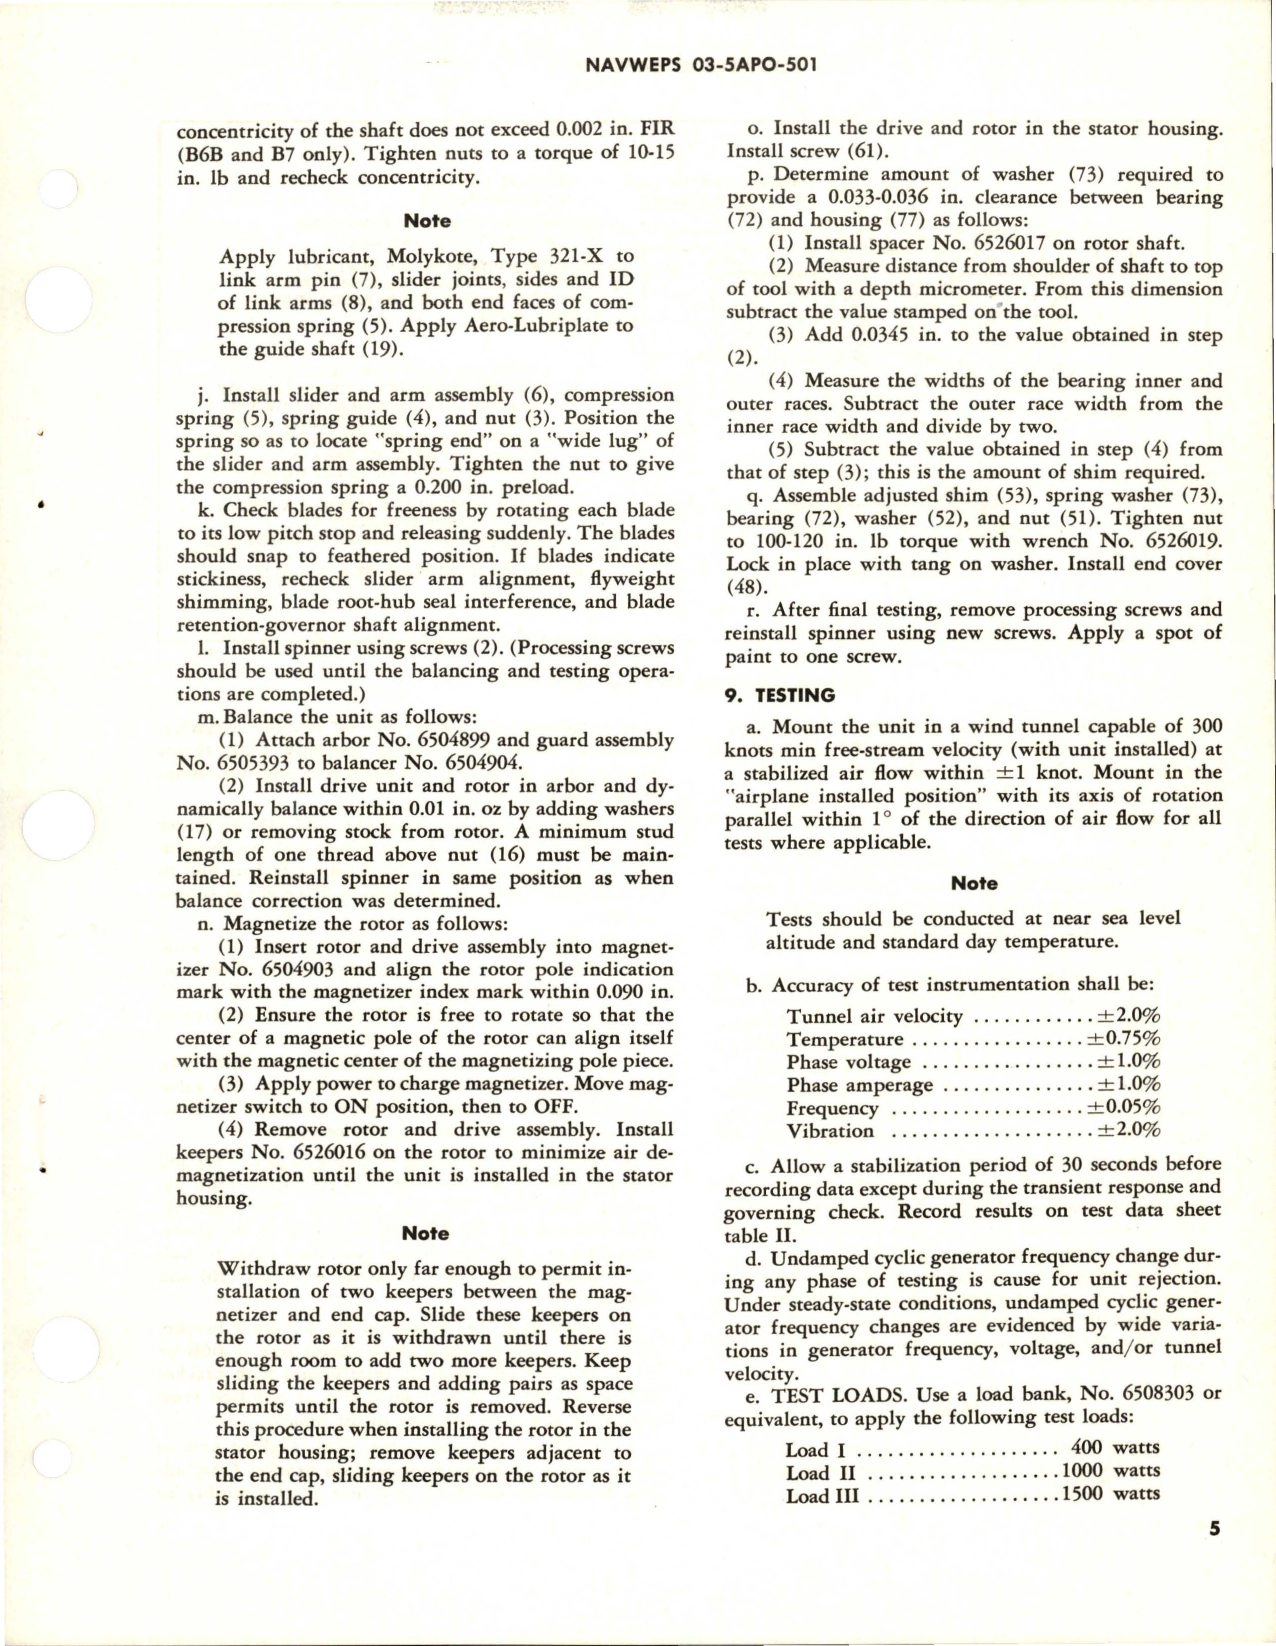 Sample page 7 from AirCorps Library document: Overhaul Instructions with Illustrated Parts Breakdown for Air Driven Generator Assembly - Parts 6509402, 6505115, and 6522875